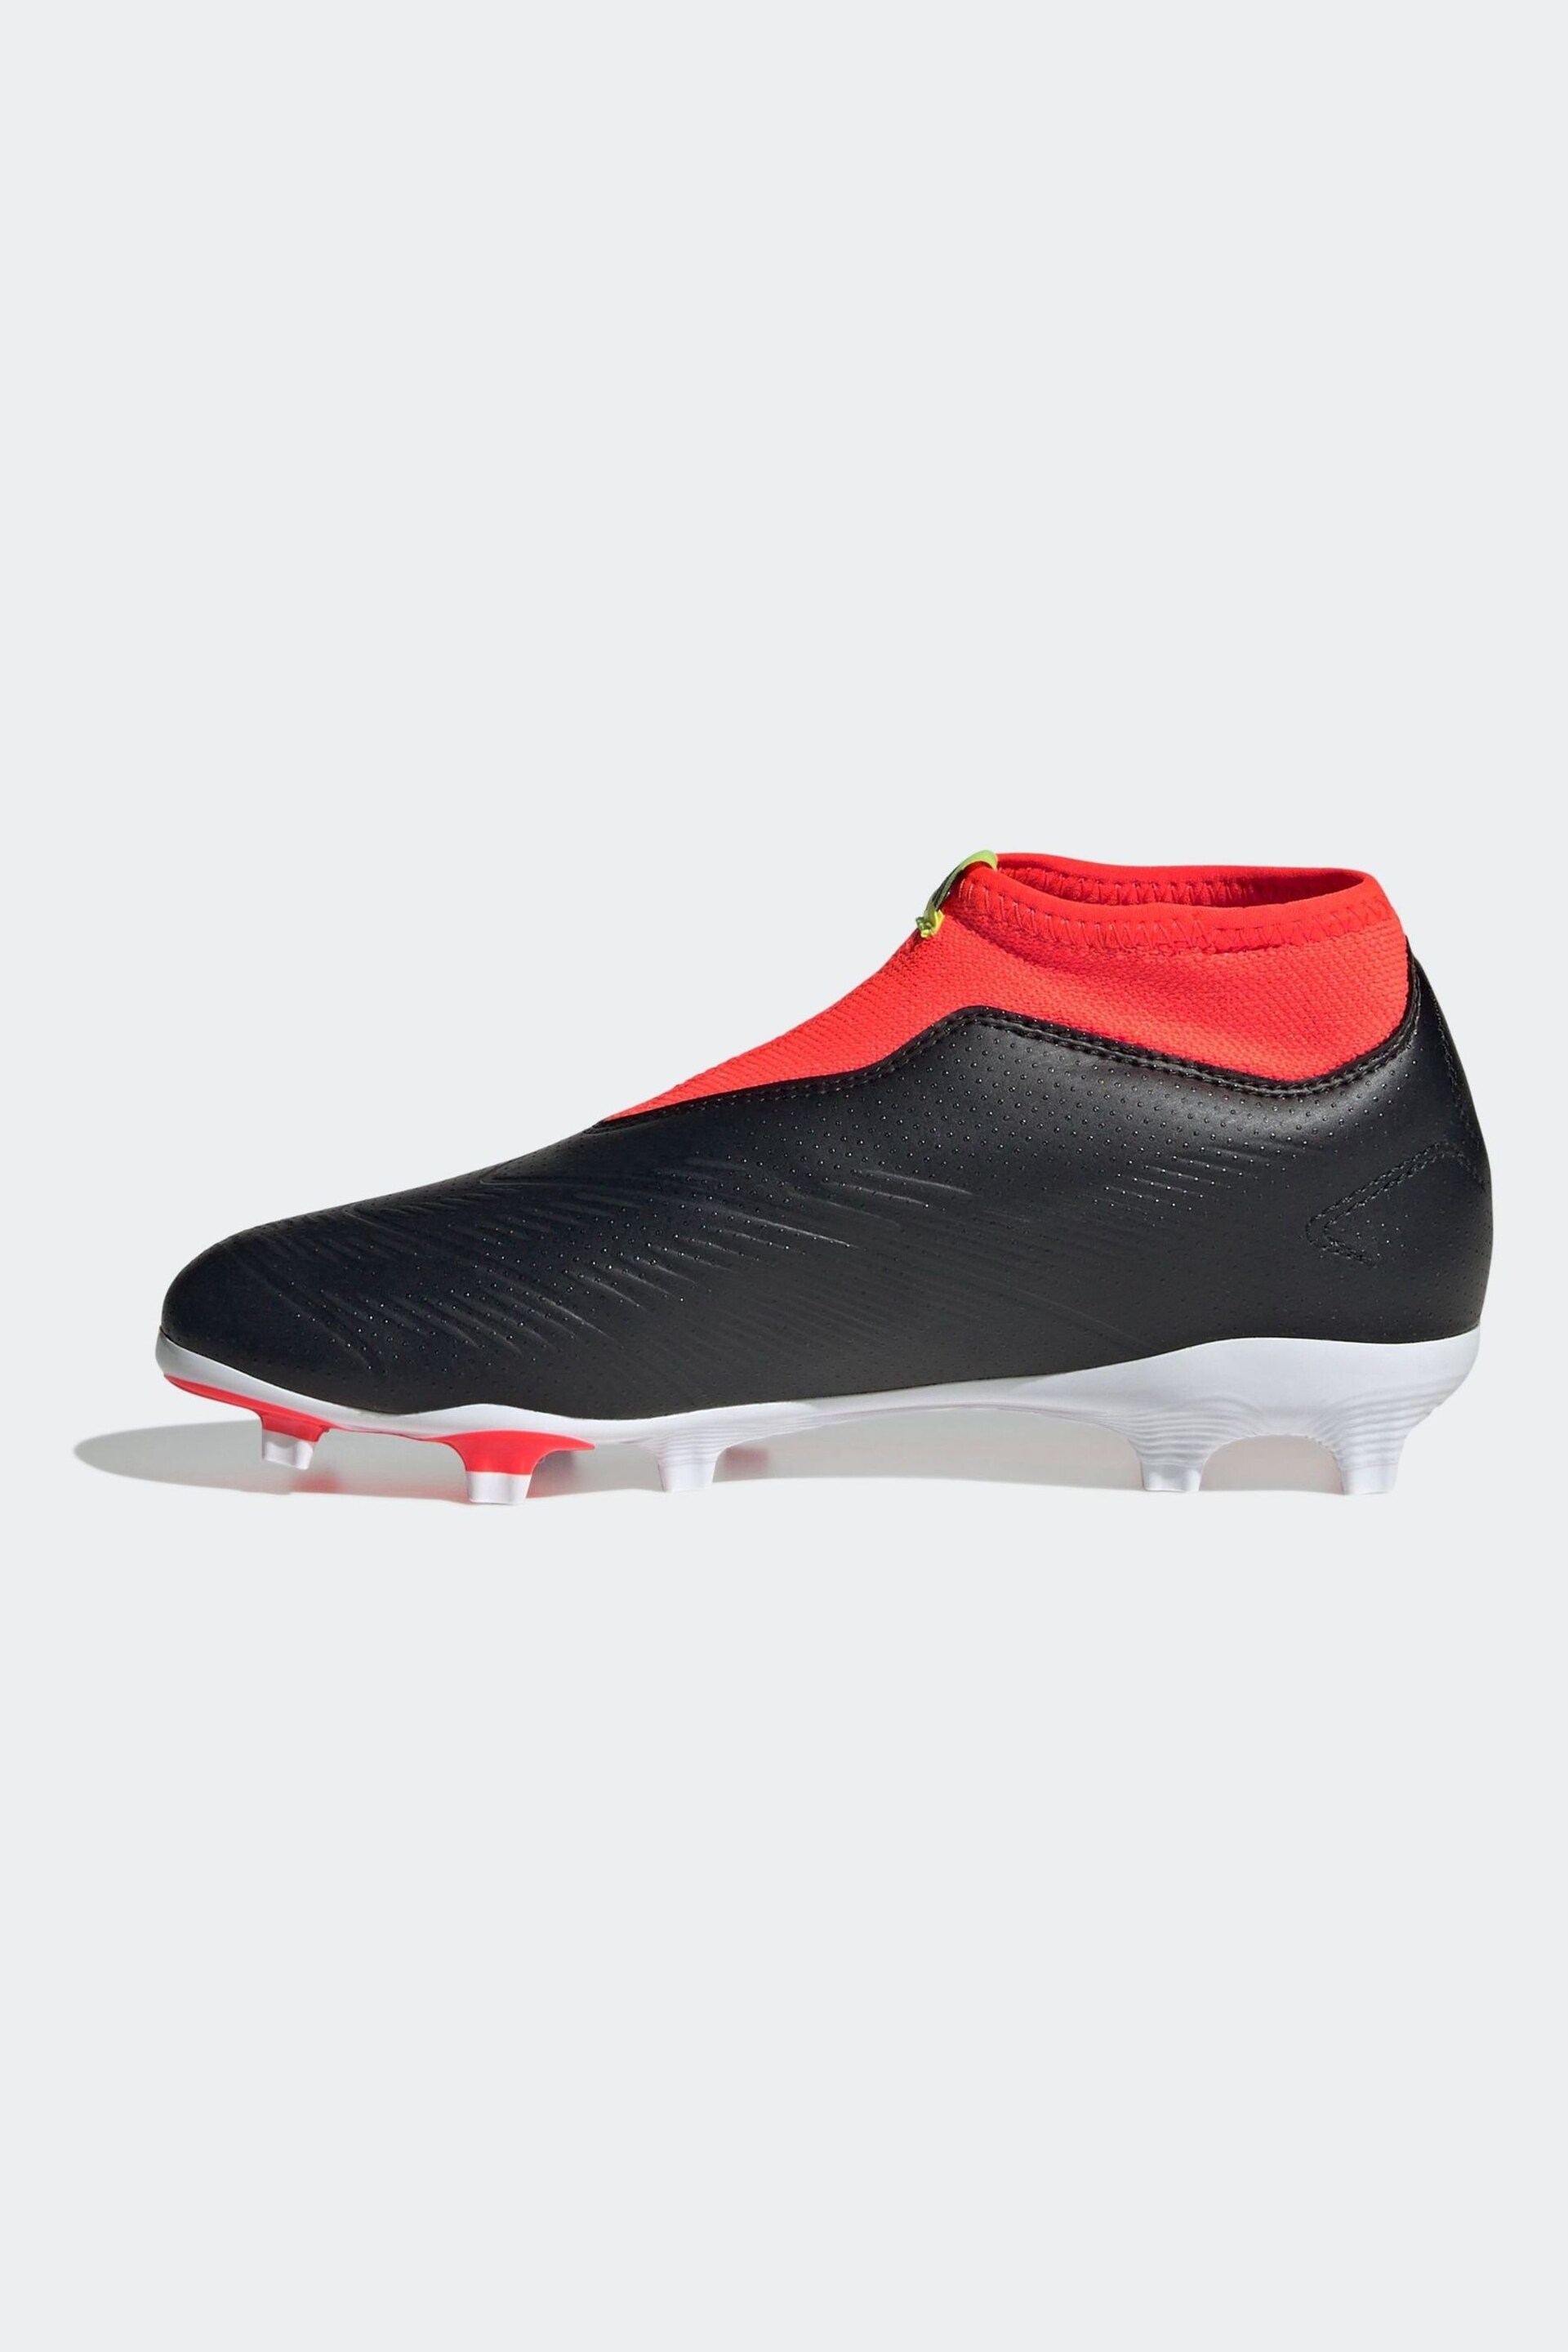 adidas Black Football Predator 24 League Laceless Firm Ground Kids Boots - Image 2 of 9